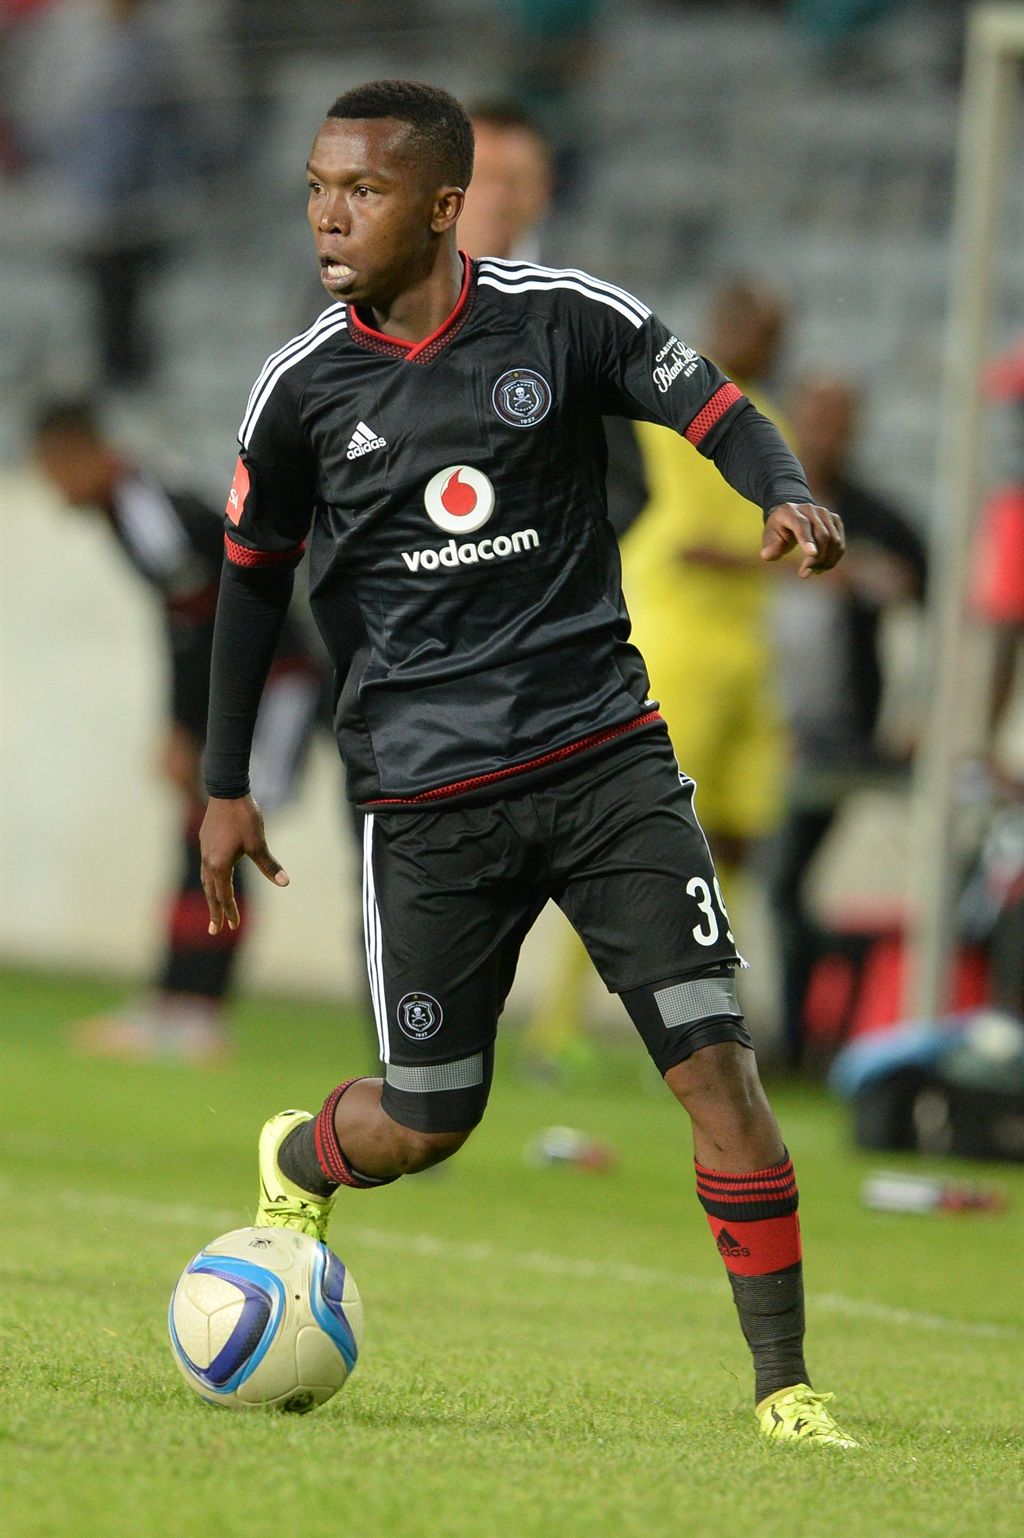 SOWETO, SOUTH AFRICA - SEPTEMBER 18: Roger Majafa during the Absa Premiership match between Orlando Pirates and Black Aces at Orlando Stadium on September 18, 2015 in Soweto, South Africa. (Photo by Lefty Shivambu/Gallo Images)